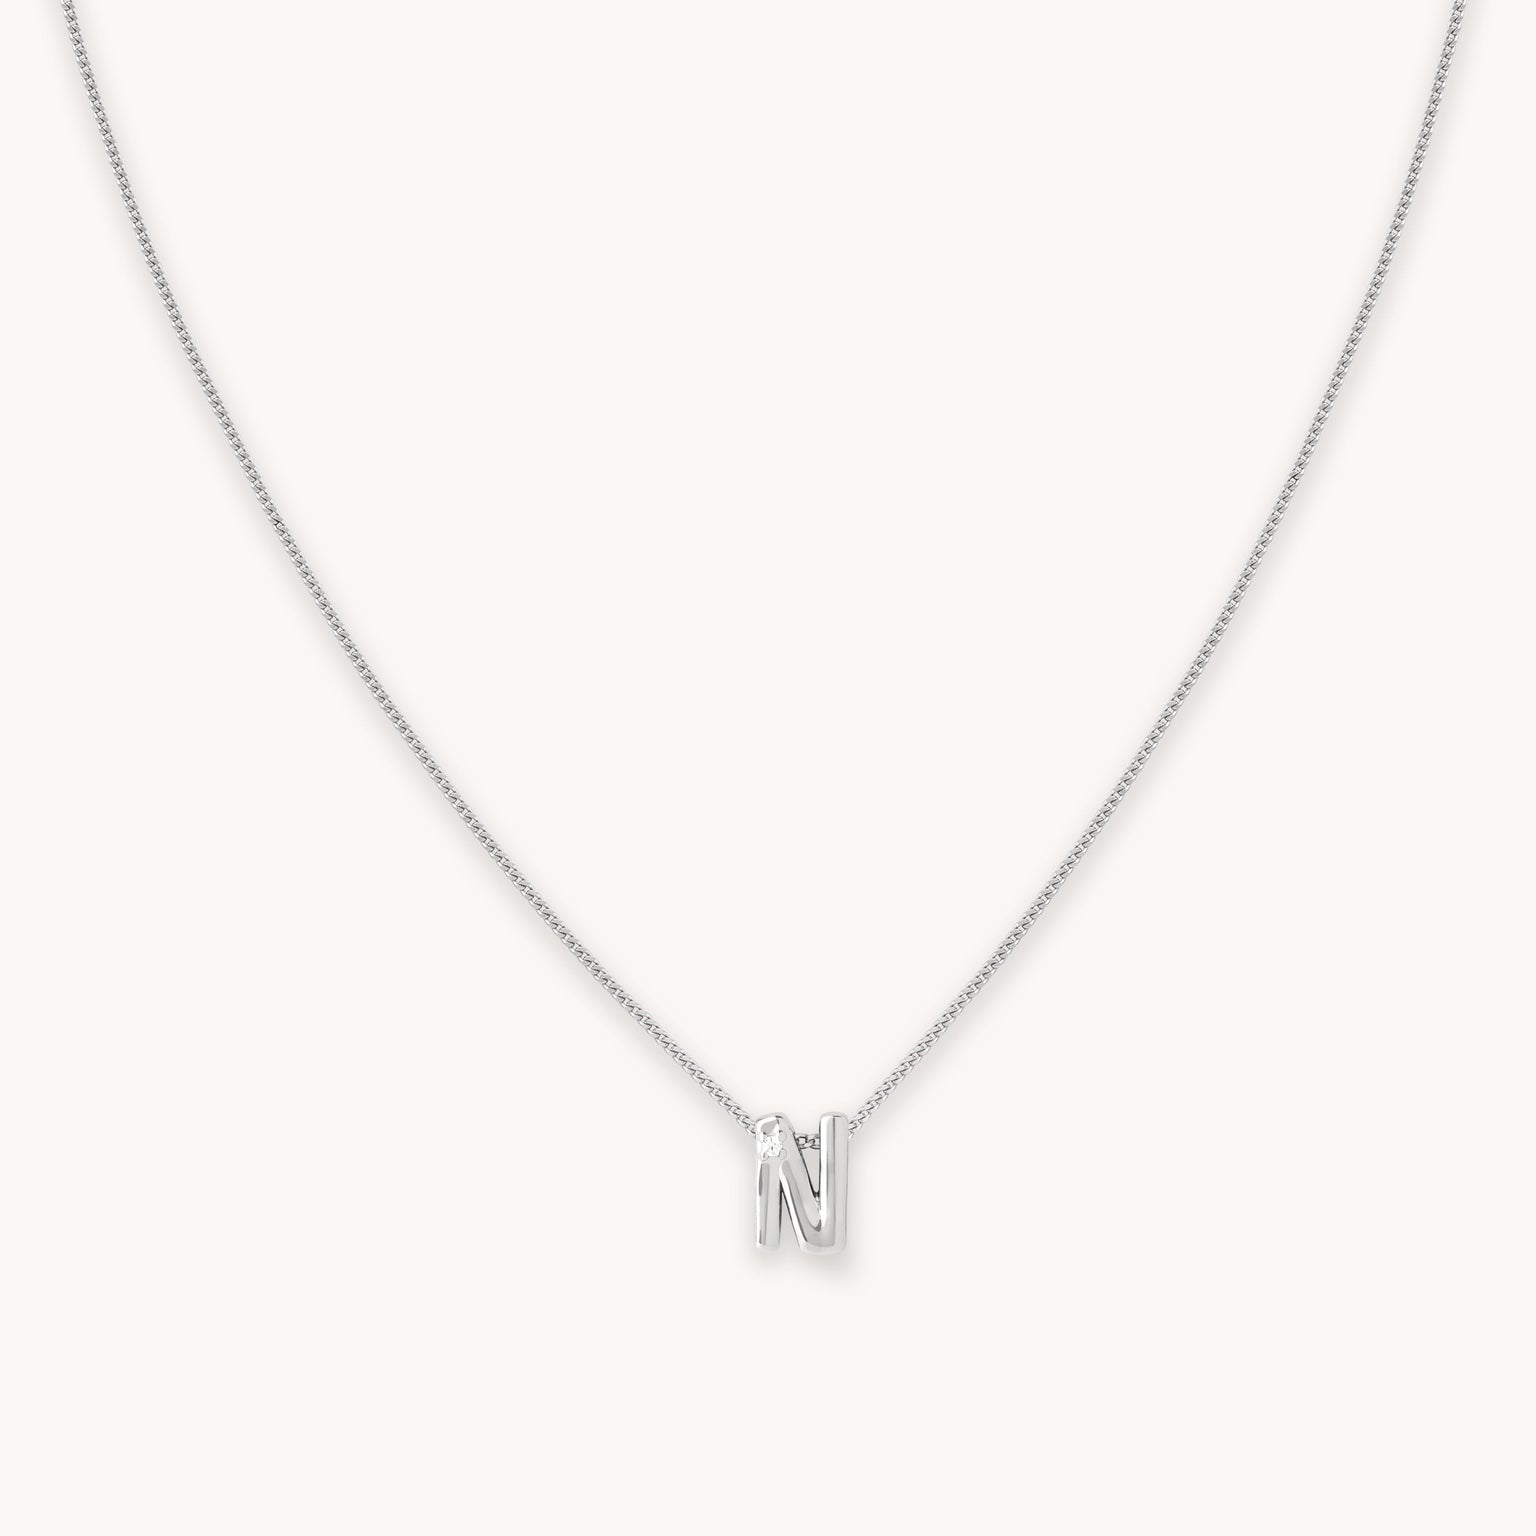 N Initial Pendant Necklace in Silver